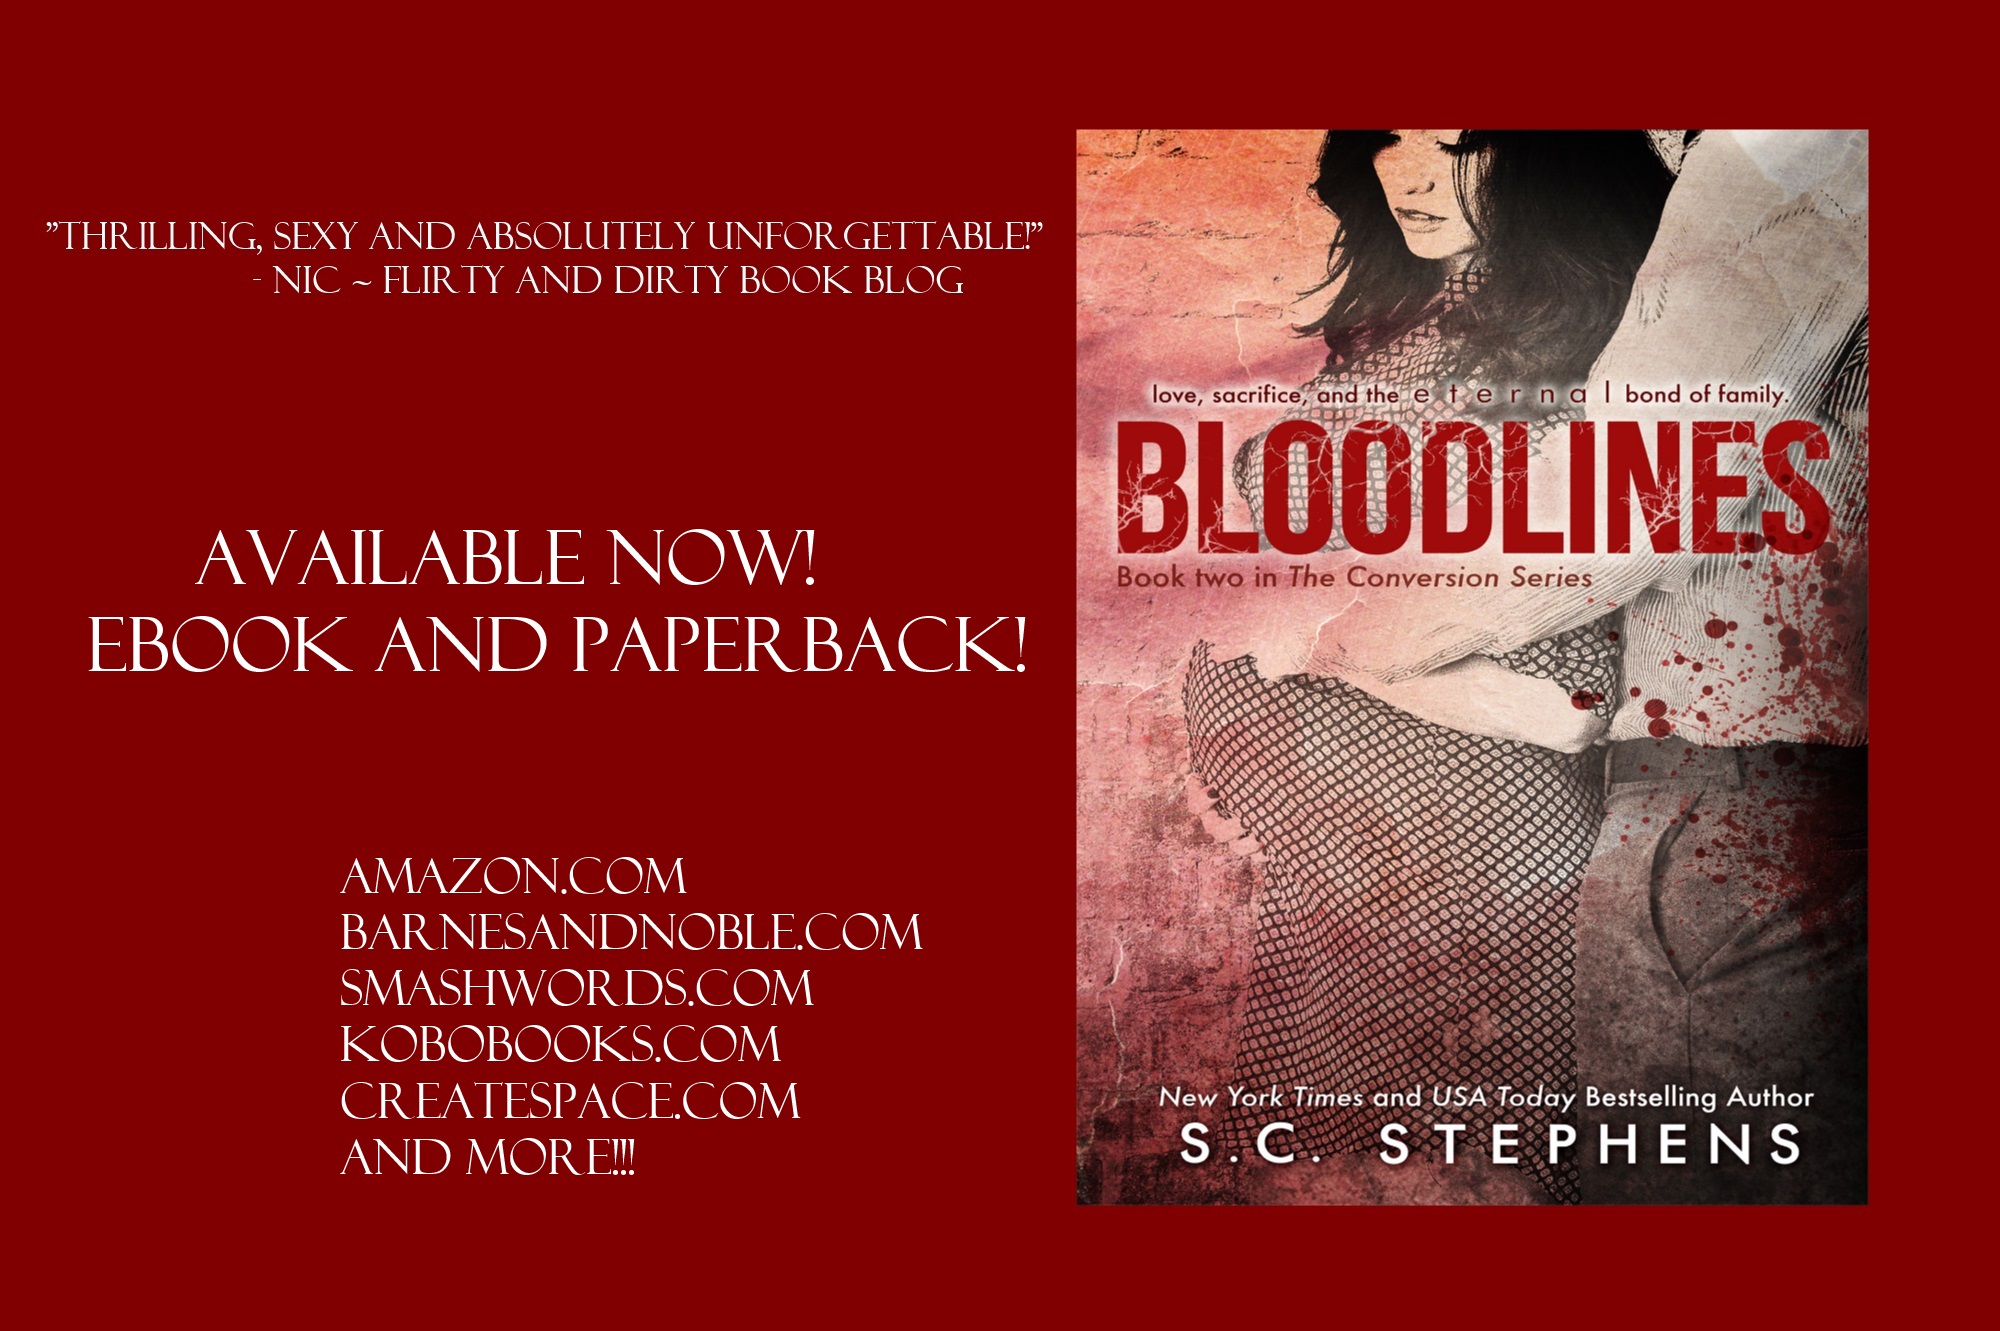 Bloodlines promo - available now